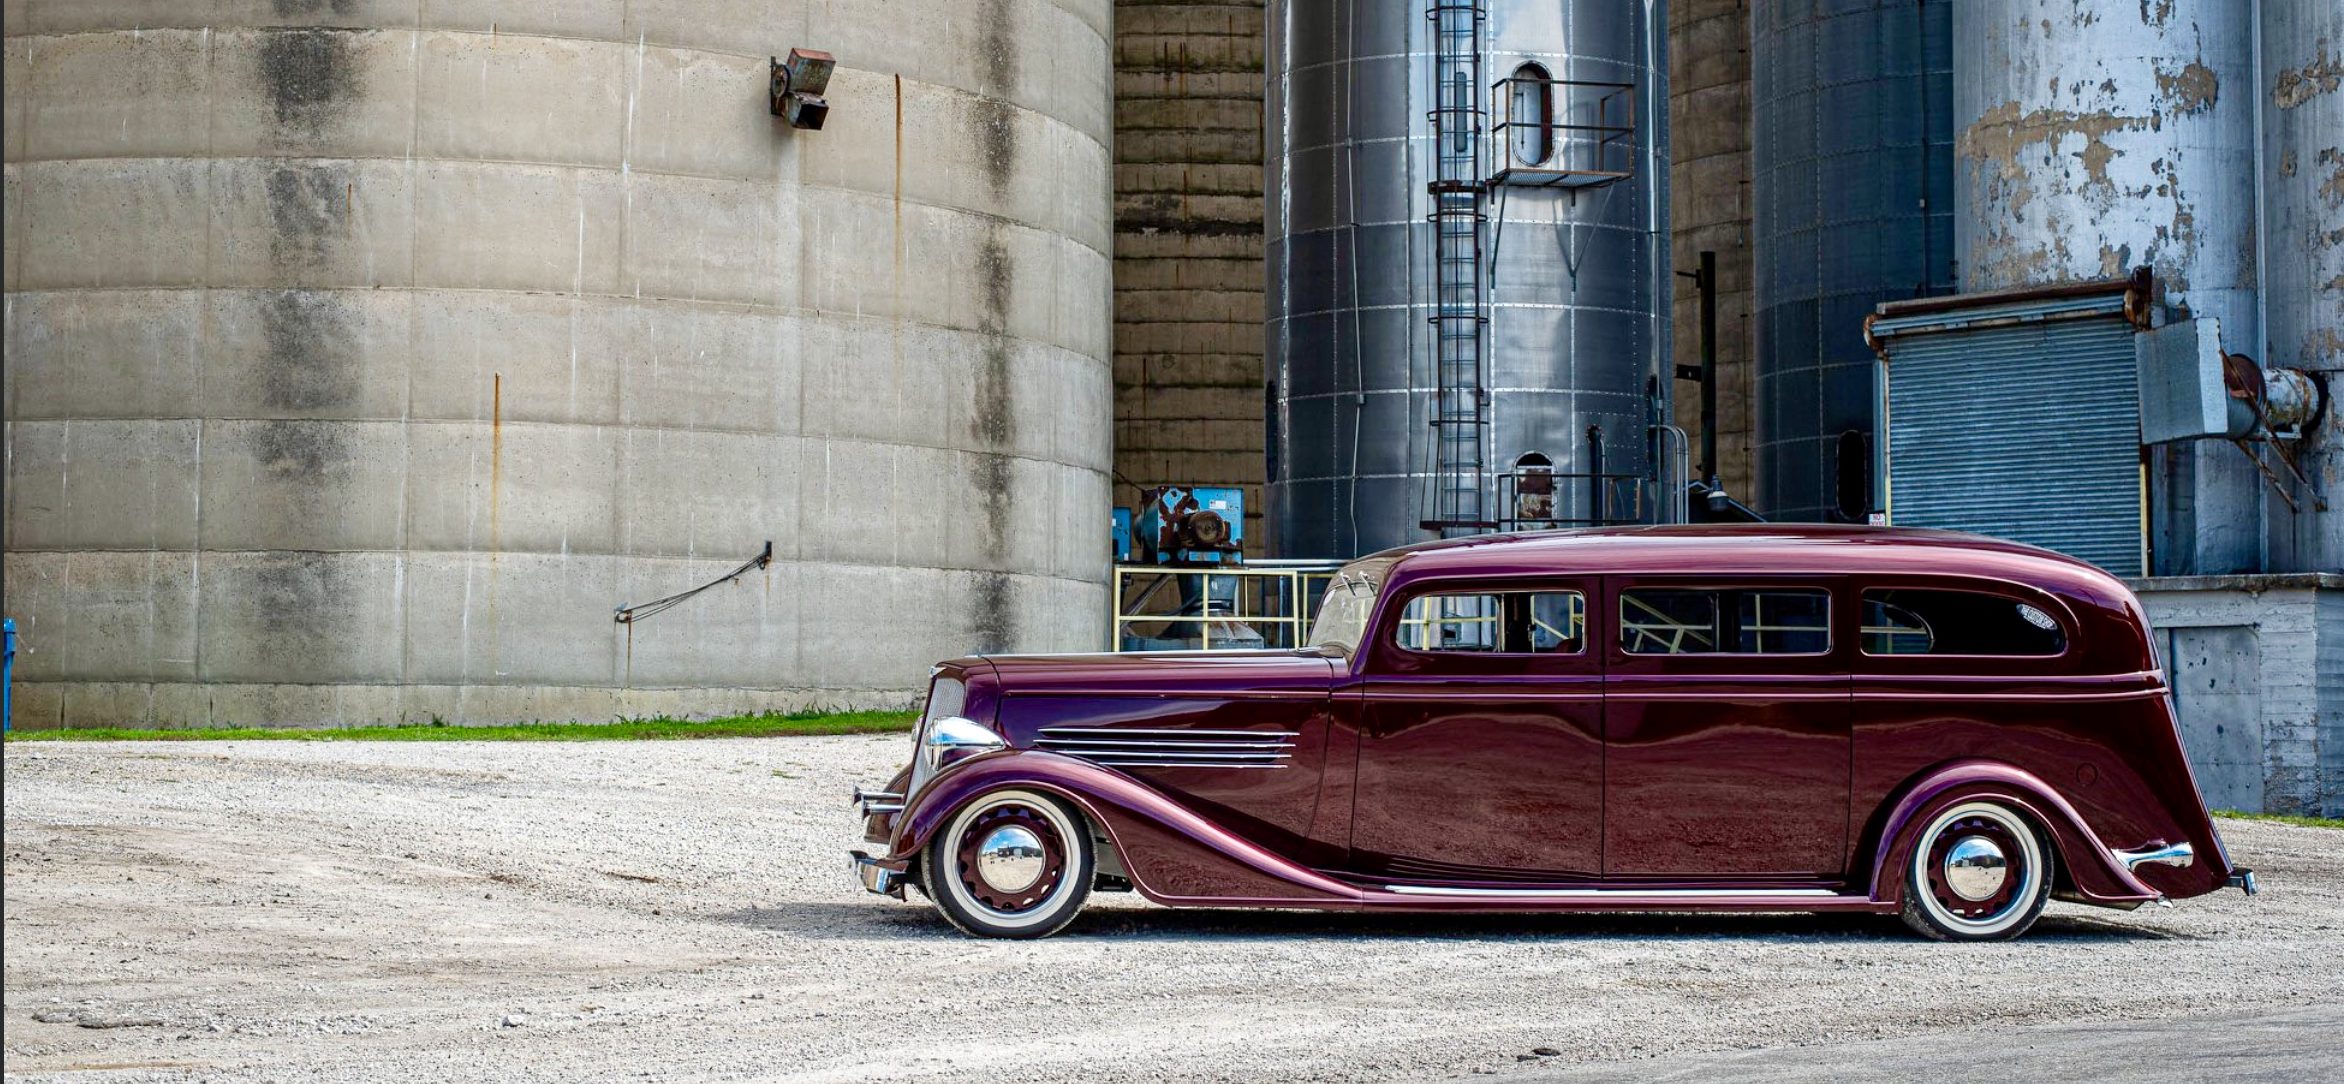 PHOTO GALLERY: 1935 Buick Hearse Transformed into Custom Limo | THE SHOP